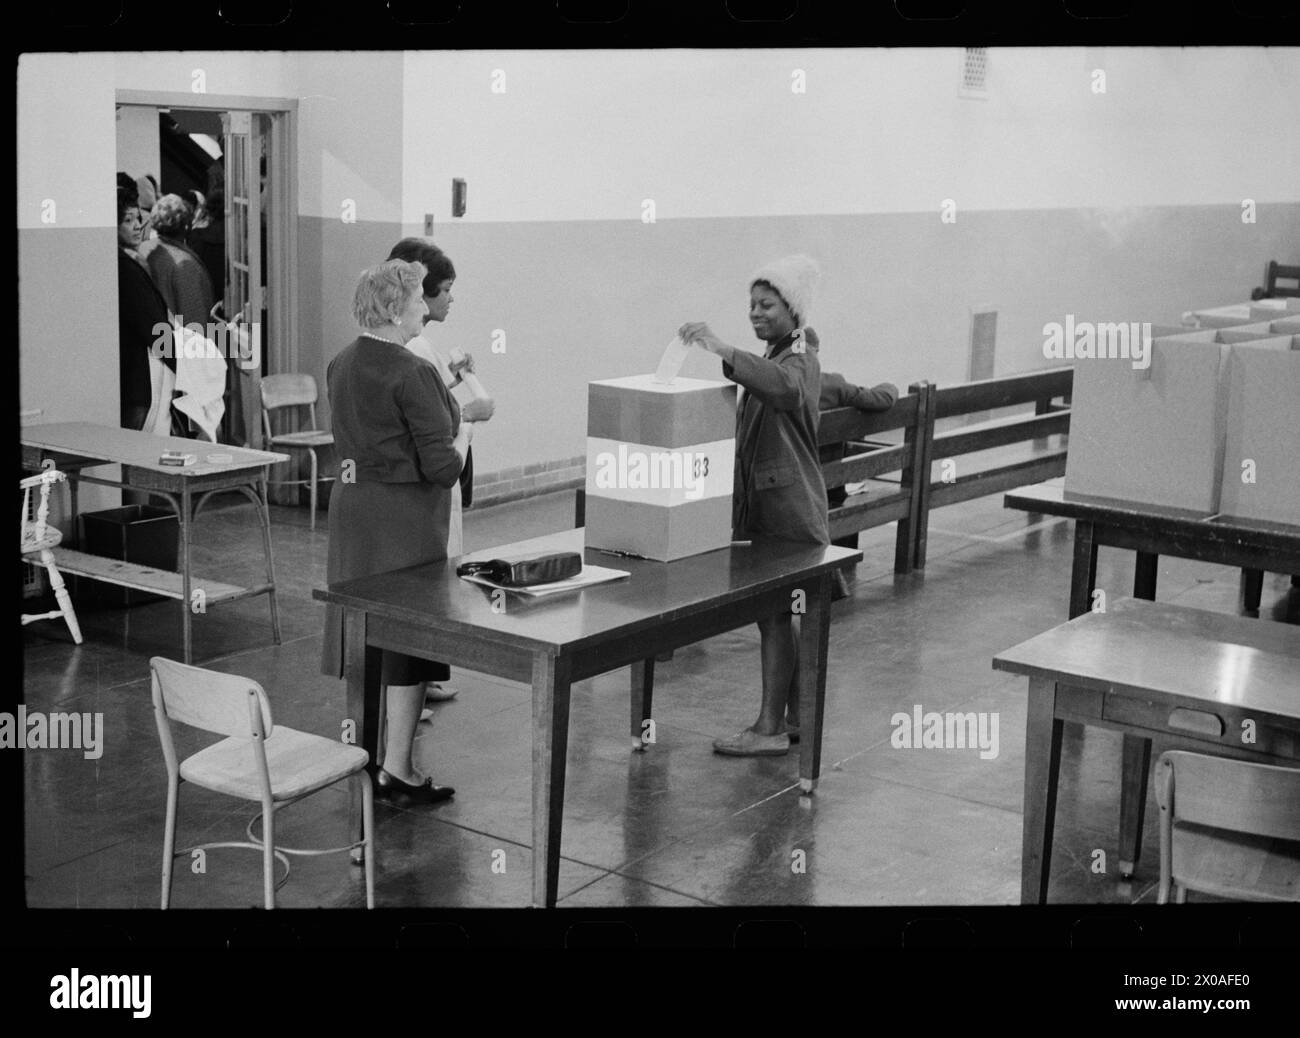 Photo shows a young woman casting her ballot at Cardozo High School, overseen by election workers, with other voters waiting  outside in a hallway, Washington, District of Columbia, November 3, 1964. Photo by Marion S Trikosko/U S News and World Report Collection) Stock Photo